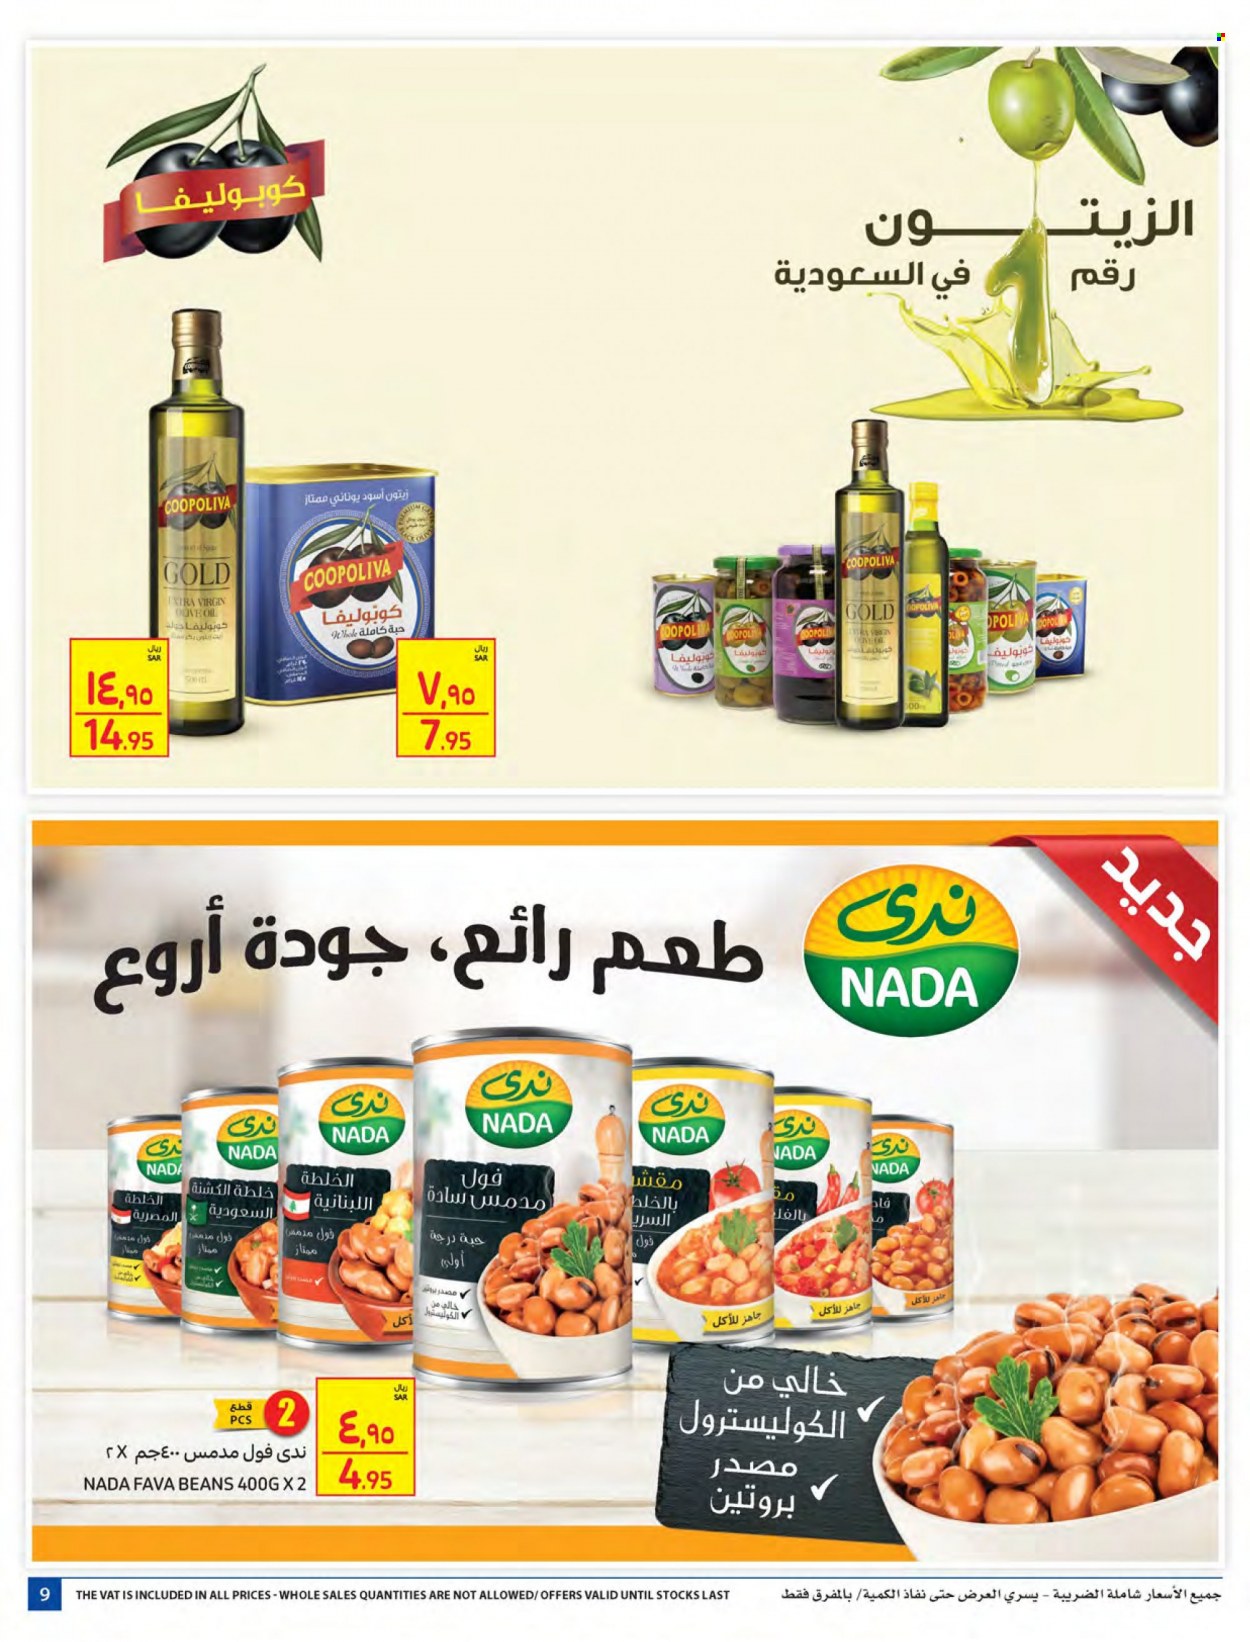 Carrefour flyer  - 01.26.2022 - 02.01.2022. Page 9.